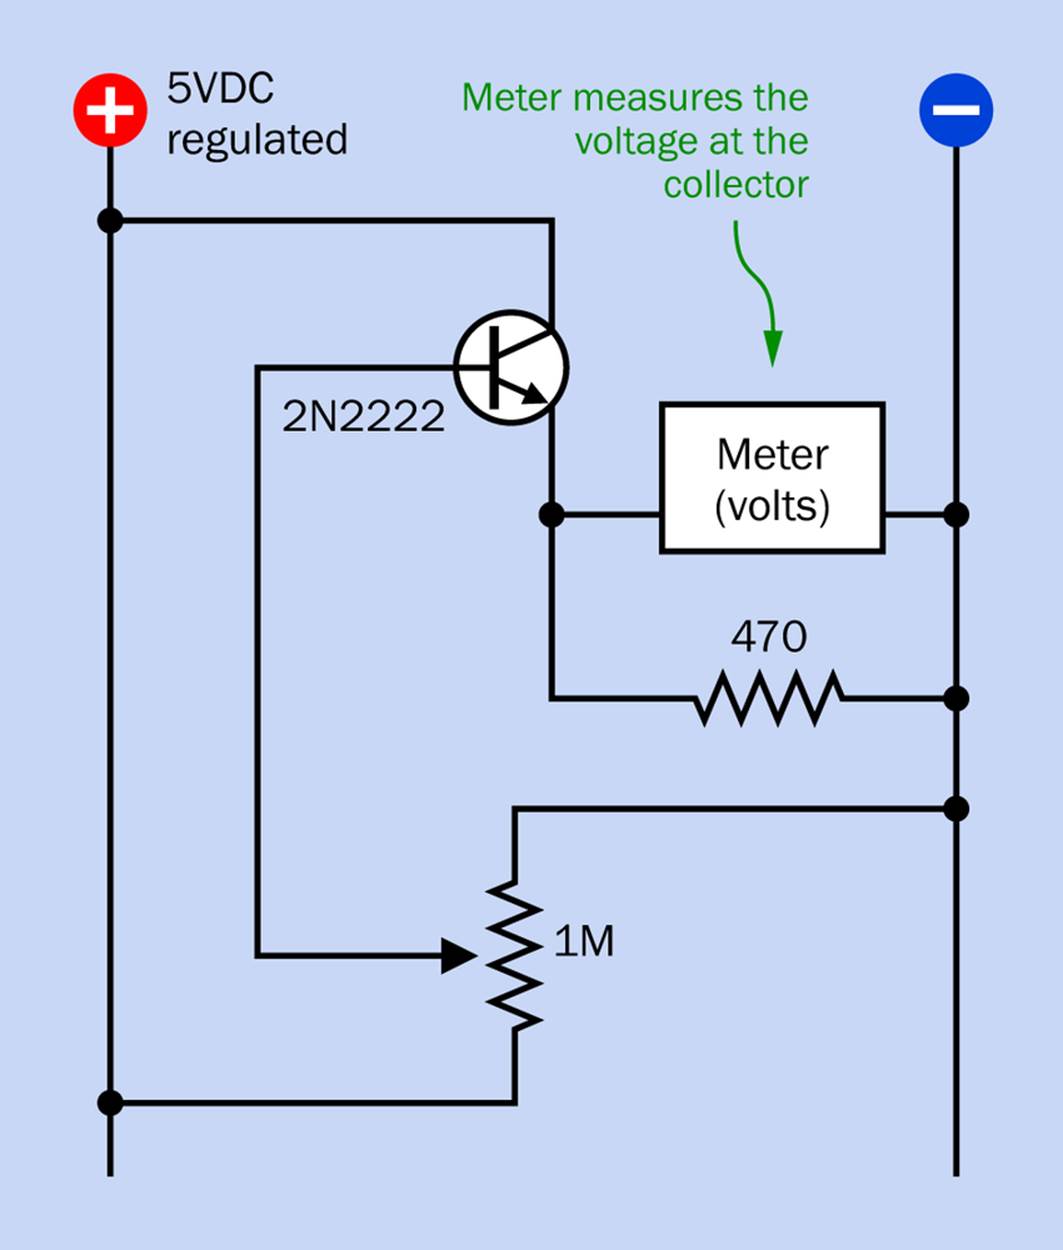 In this configuration, the meter measures voltage between the emitter of the transistor and the negative side of the power supply (so long as you remember to set the meter to measure voltage rather than current).